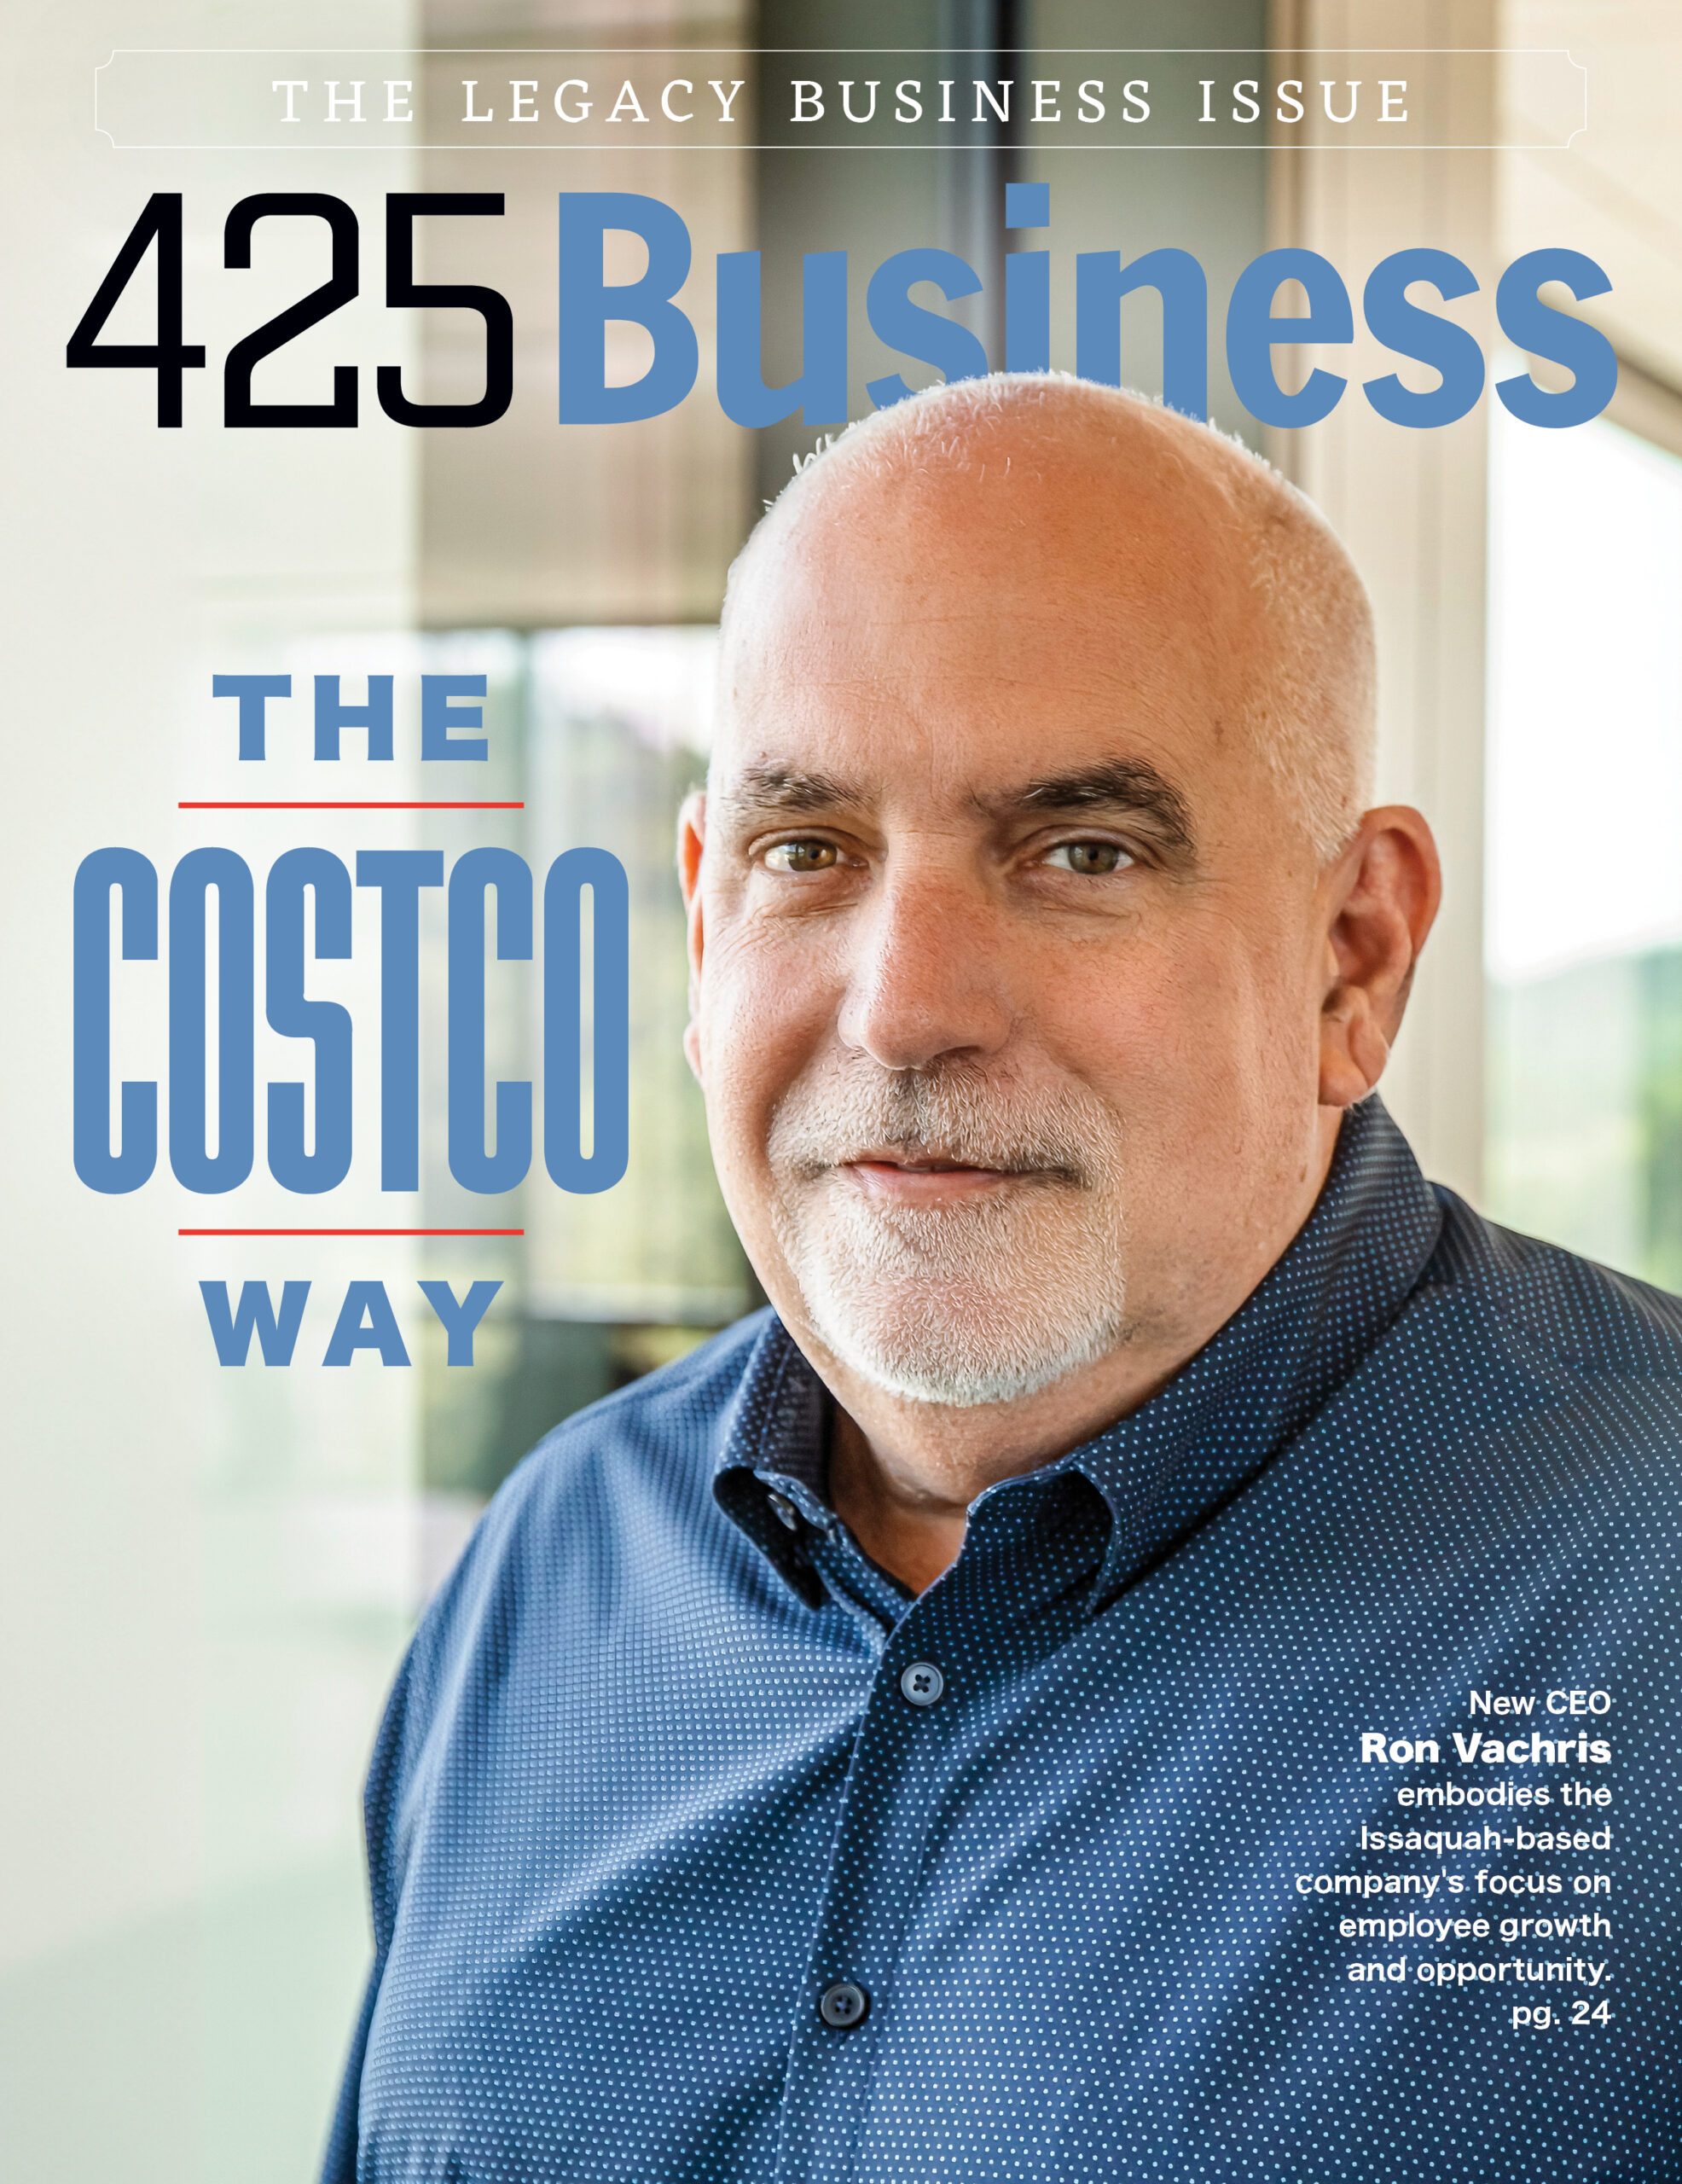 425Business Magazine Cover